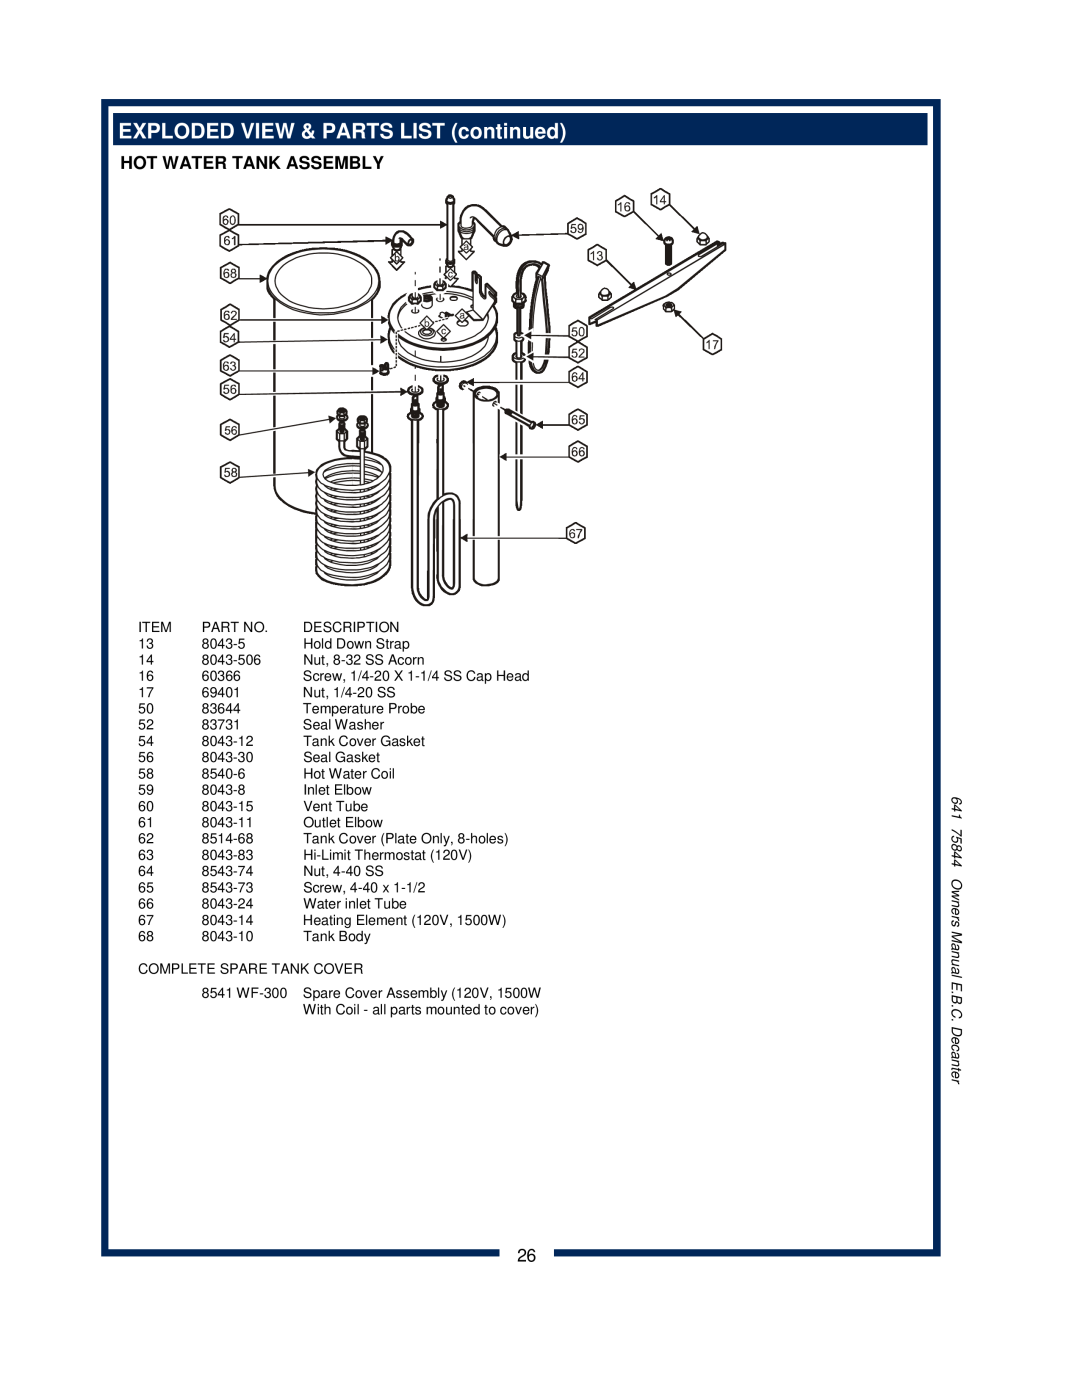 Bloomfield 1040 Hot Water Tank Assembly, EXPLODED VIEW & PARTS LIST continued, 641 75844 Owners Manual E.B.C. Decanter 